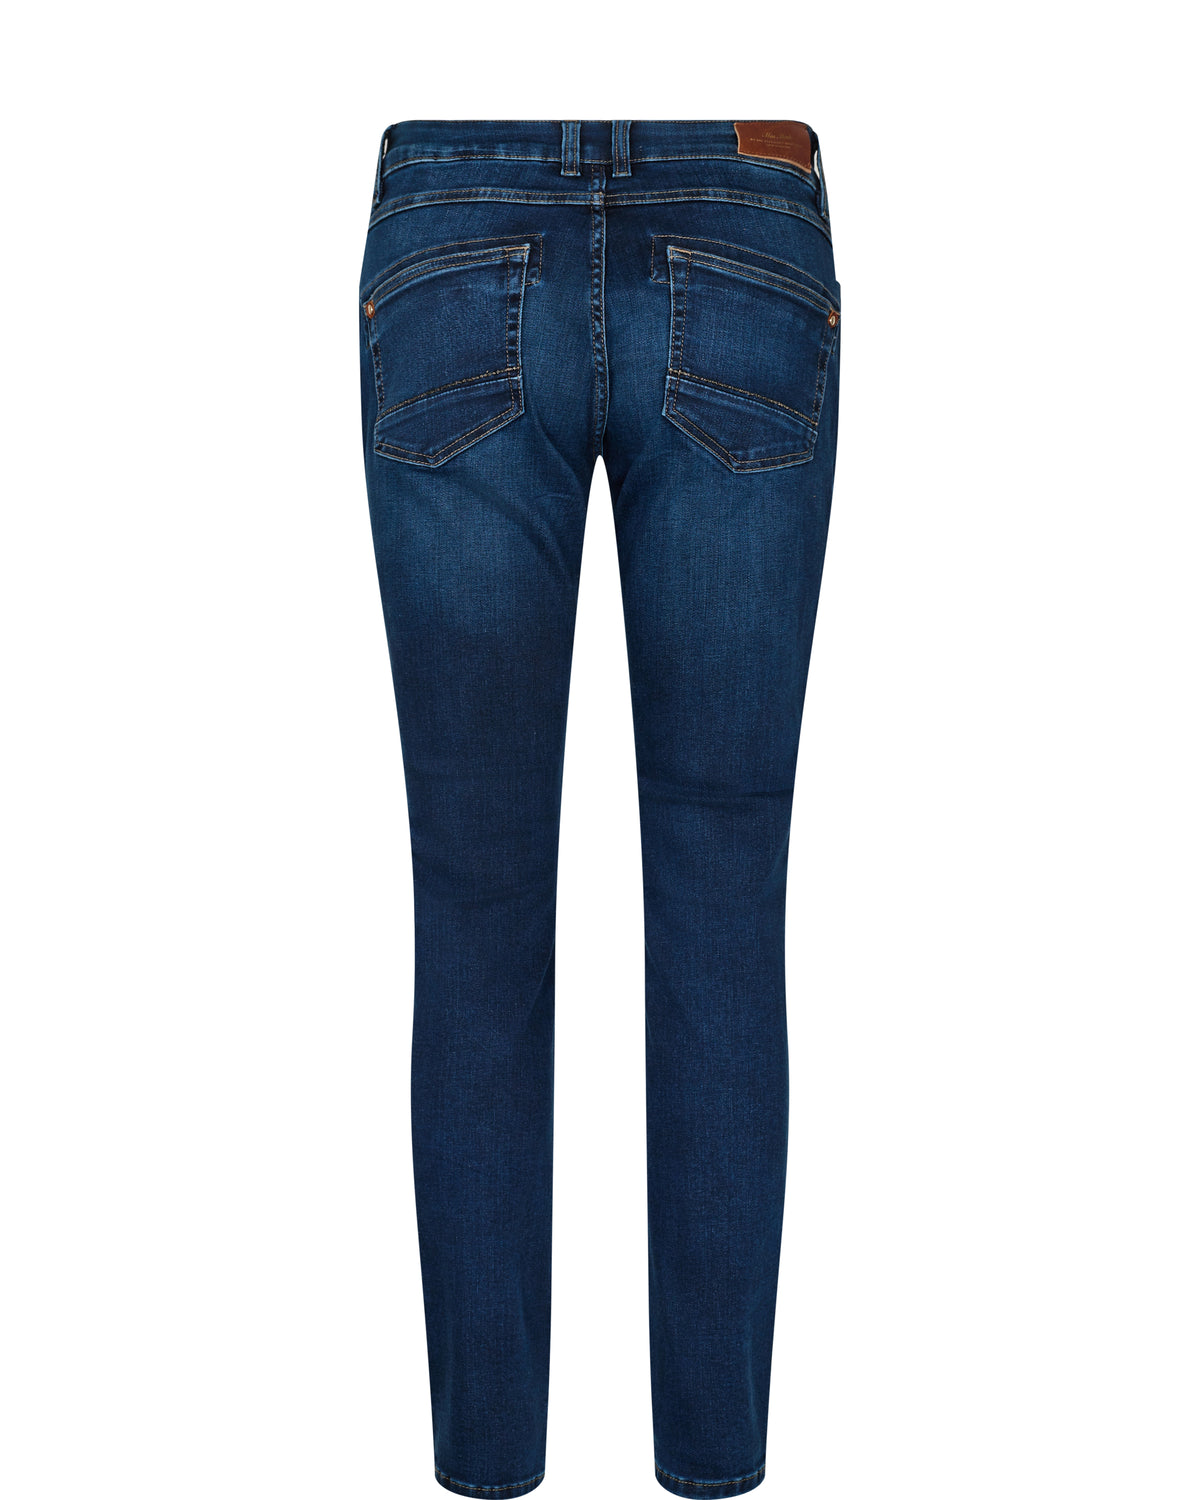 Slim cut jeans with slight fading and embroidery around the pockets